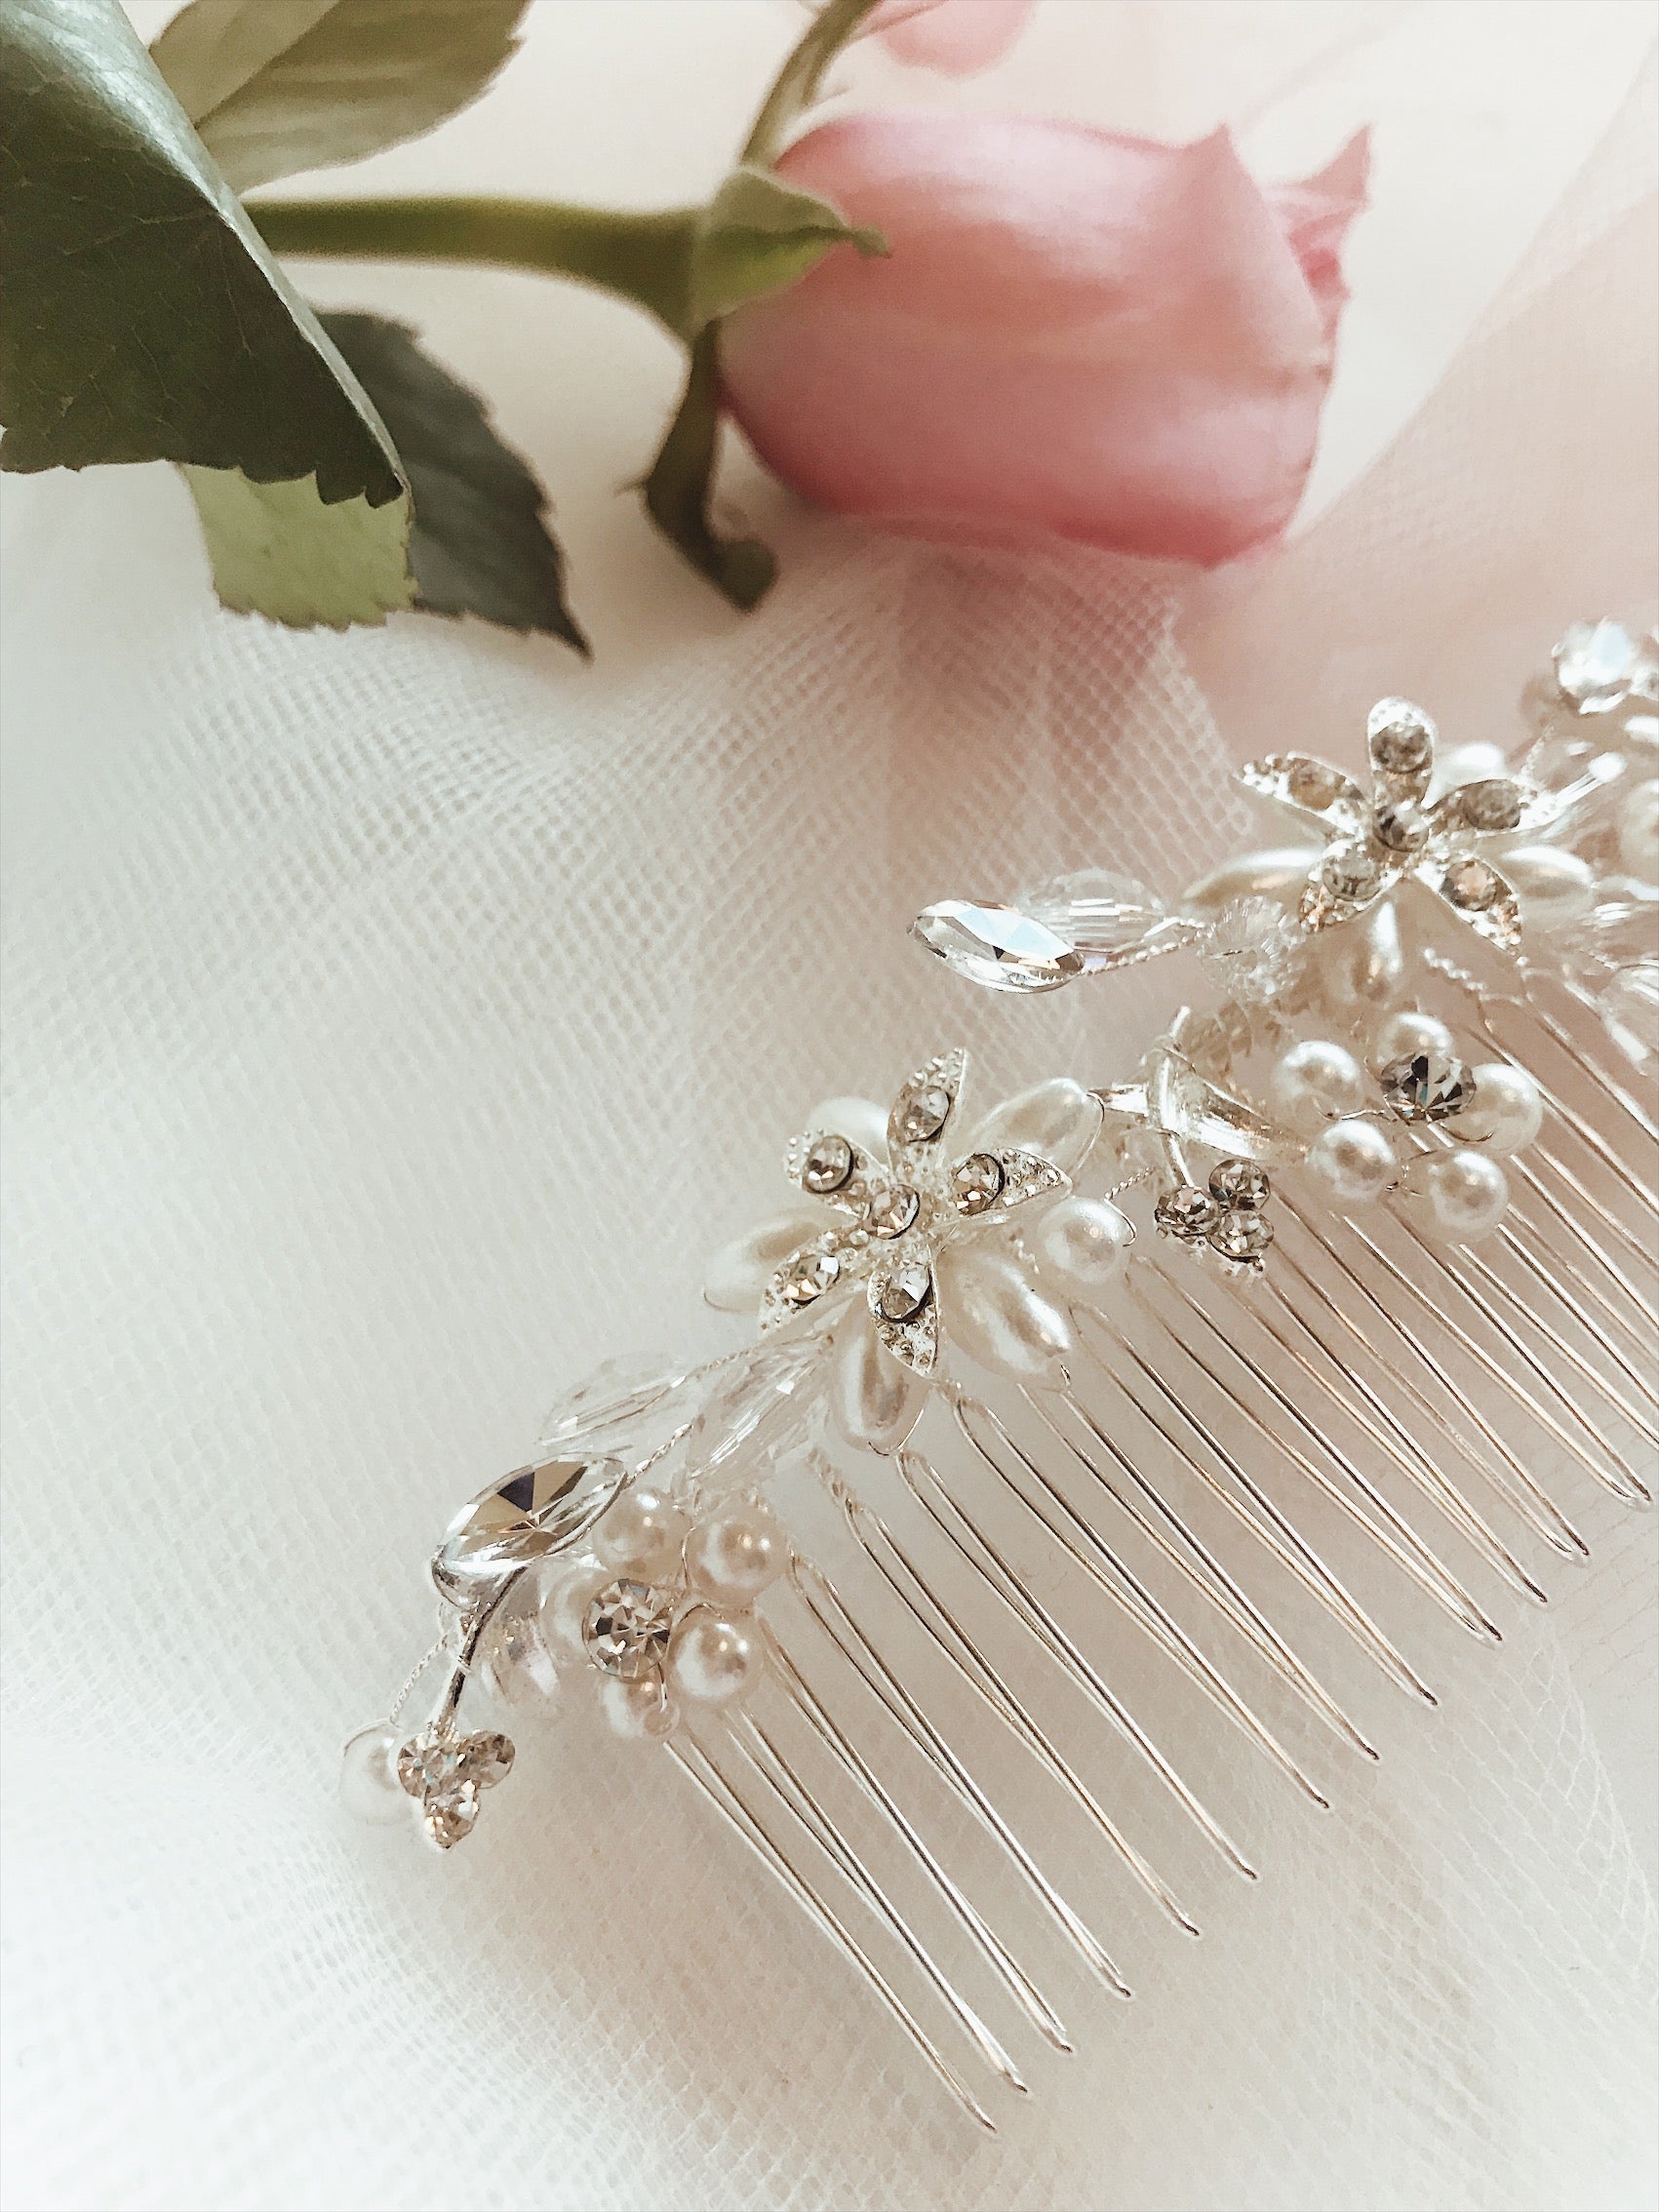 Lauren Elaine "Honeysuckle" bridal hair comb with pearl and crystal detailing